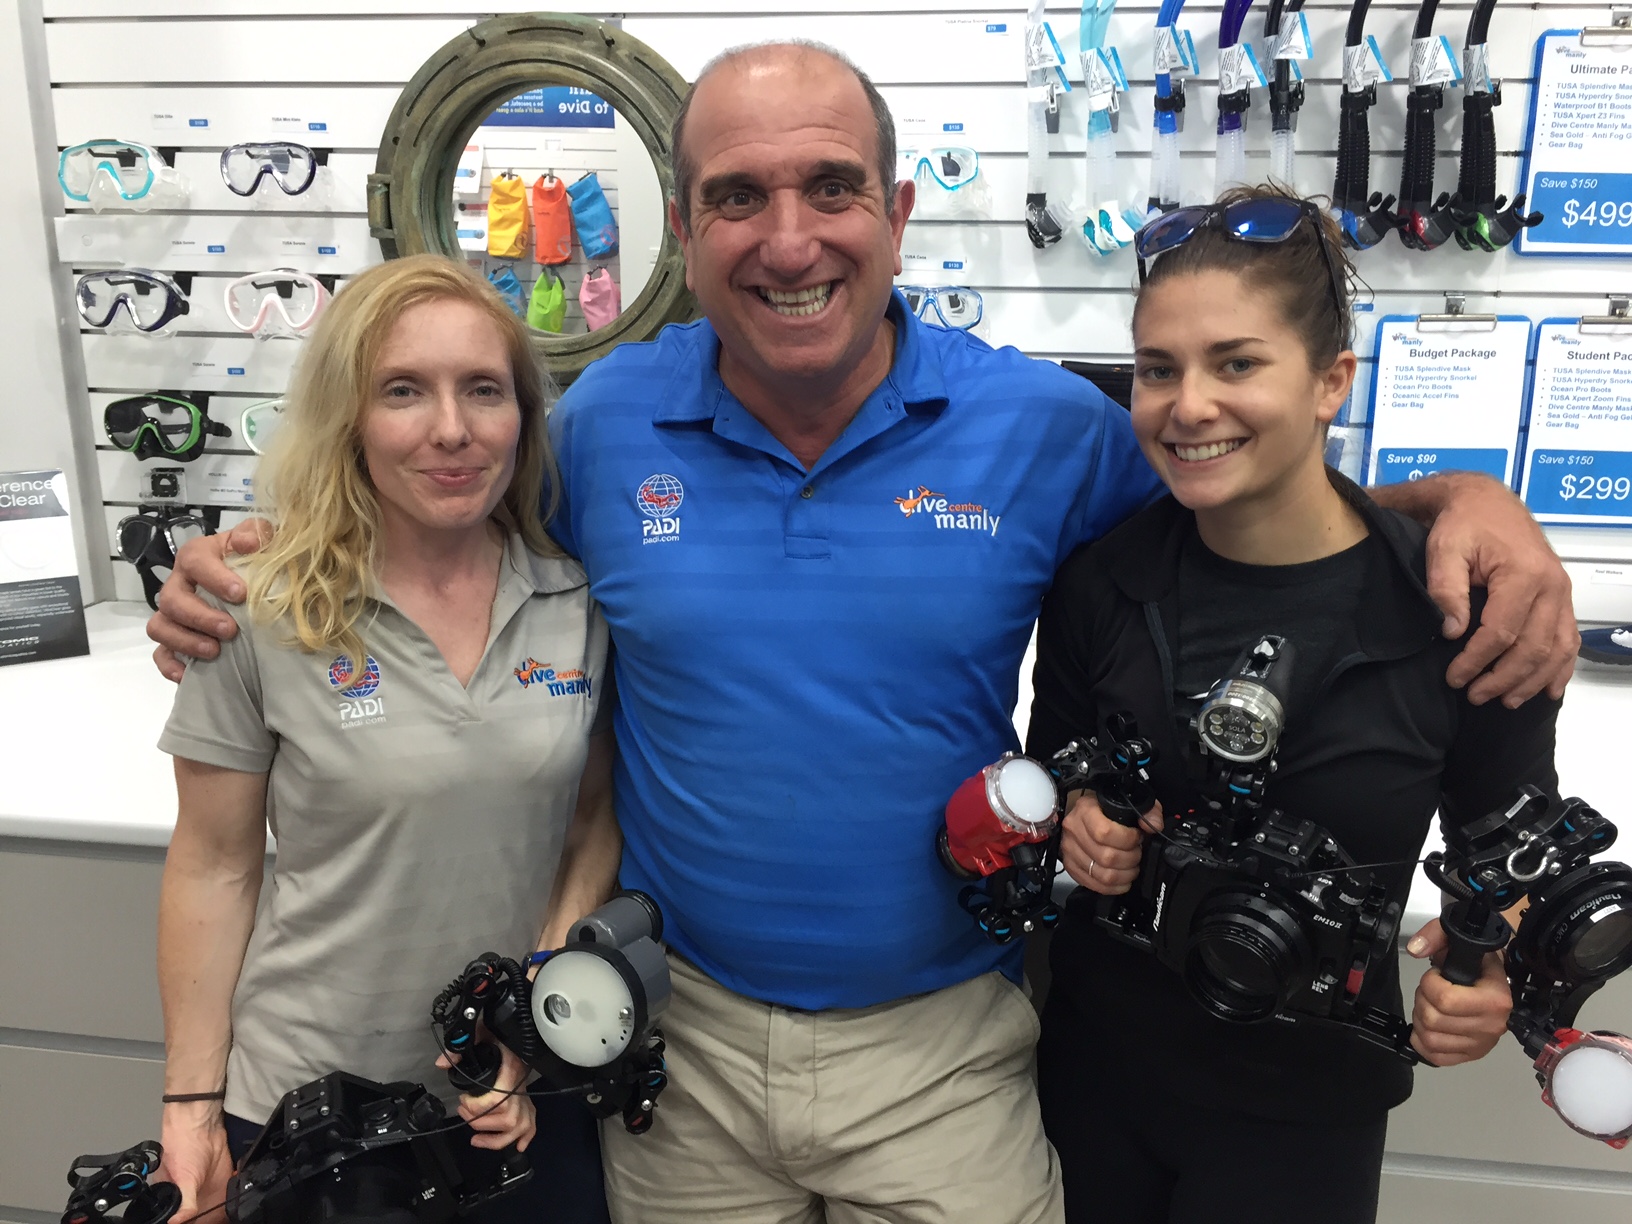 Thanks to instructors Rosie and Tricky of Dive Centre Manly for your generous support teaching me PADI Digital Underwater Photographer and Drysuit Diver courses!